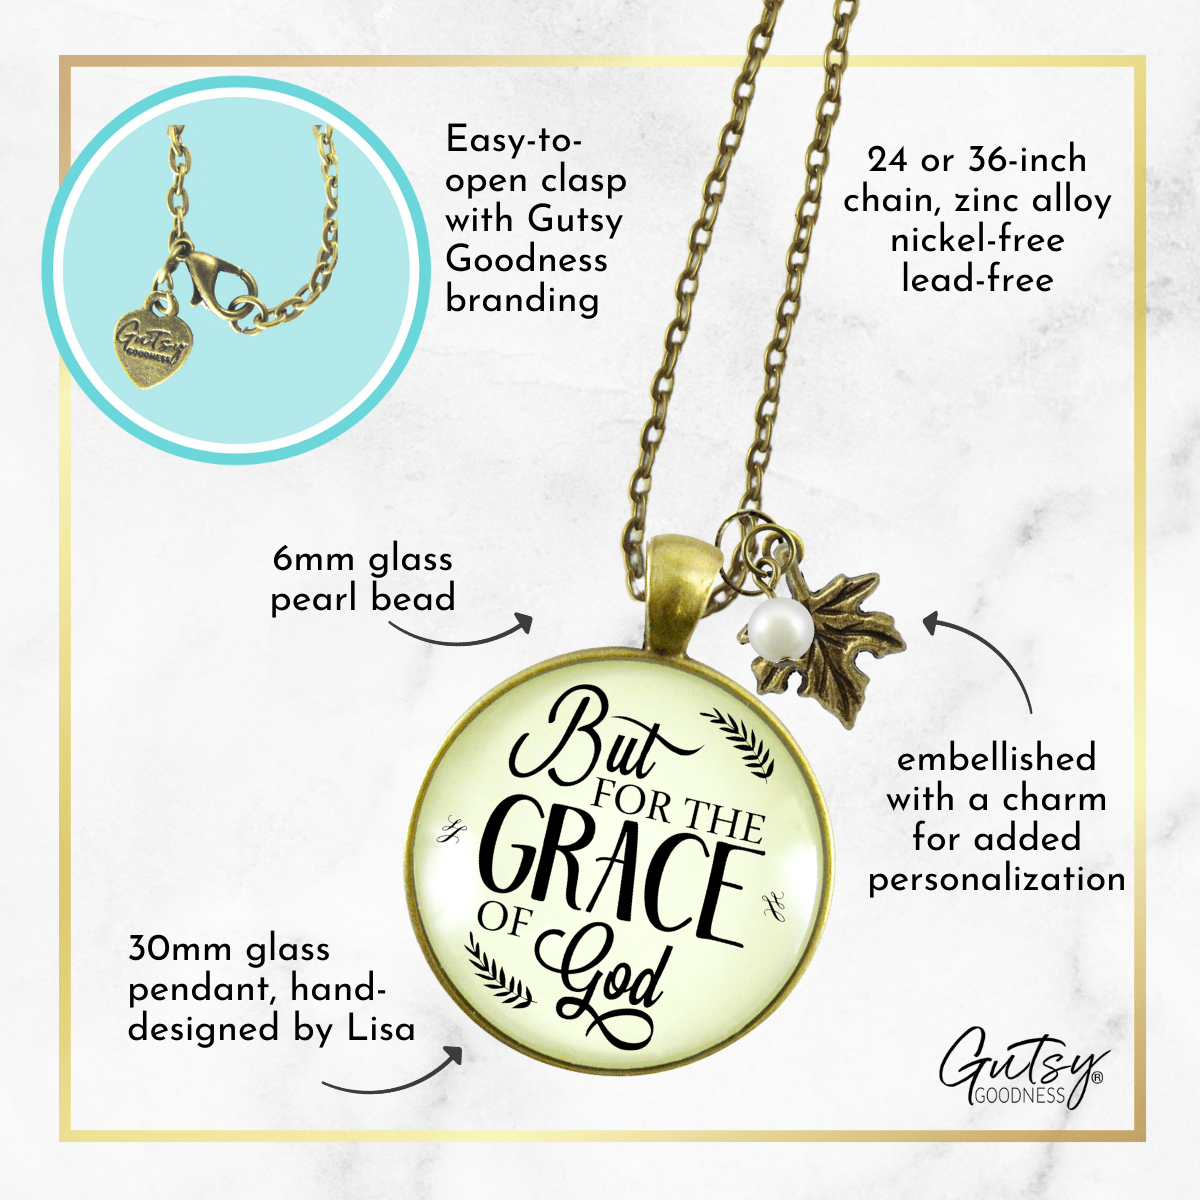 Faith Necklace But For The Grace of God Inspirational Encouragement Jewelry - Gutsy Goodness Handmade Jewelry;Faith Necklace But For The Grace Of God Inspirational Encouragement Jewelry - Gutsy Goodness Handmade Jewelry Gifts